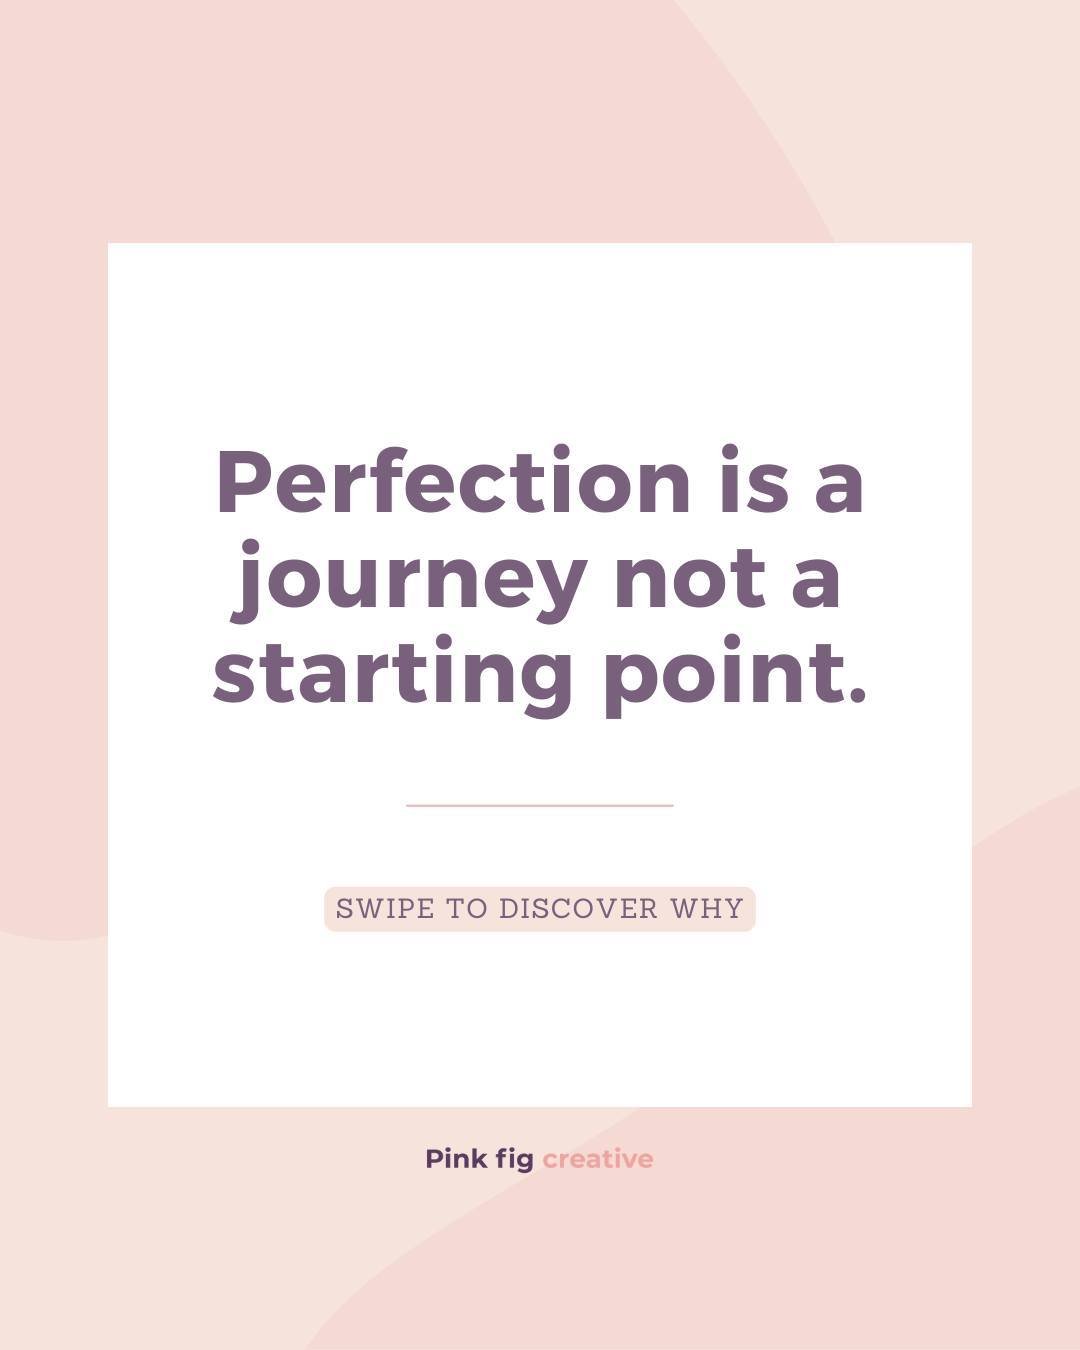 I'm here to remind you, to embrace evolution. Perfection isn't and shouldn't be the starting line, it's a journey.⁠
⁠
Don't wait for the perfect brand to launch your website. Start where you are, and let your digital presence grow with you. A website